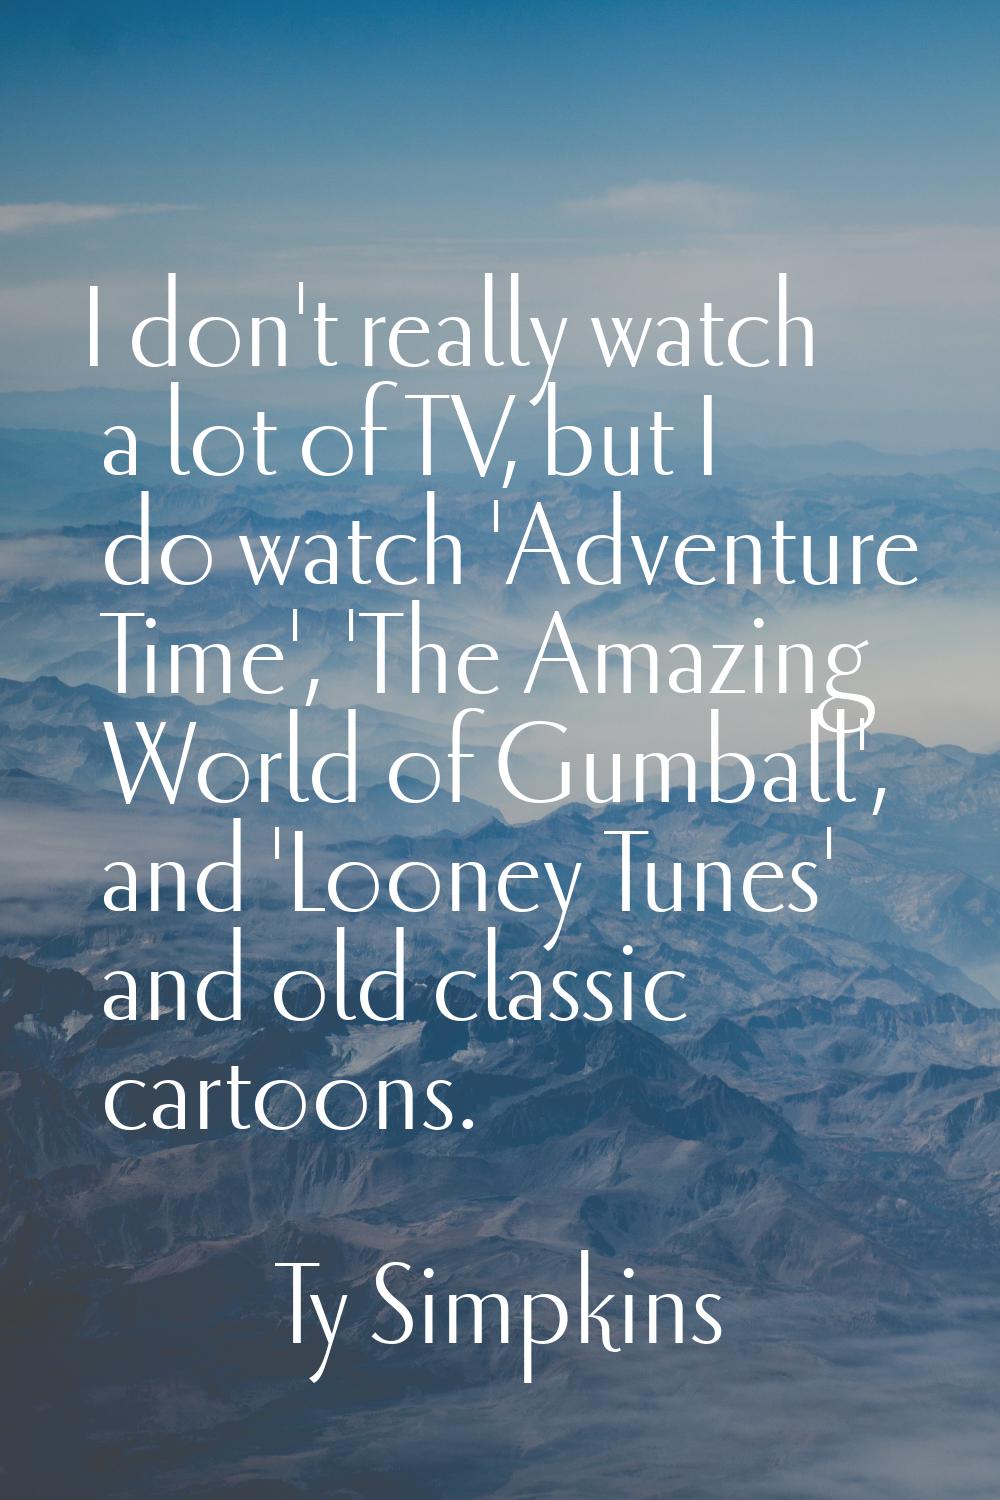 I don't really watch a lot of TV, but I do watch 'Adventure Time', 'The Amazing World of Gumball', 